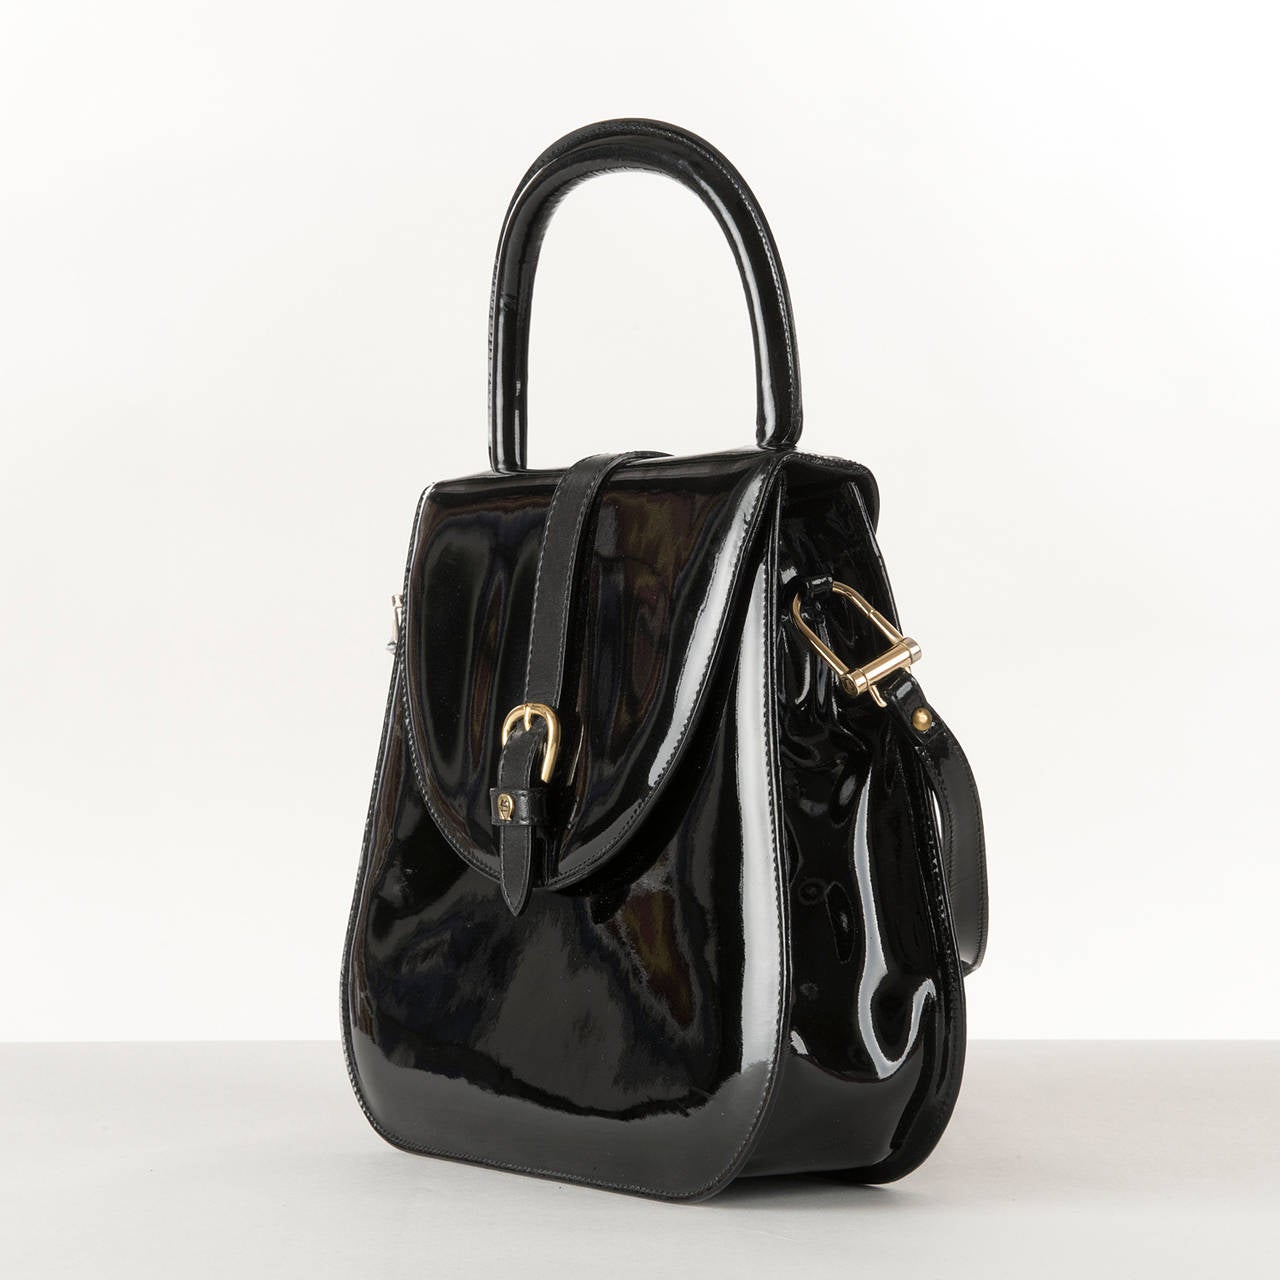 This very smart black patent leather bag by Etienne Aigner is a real 'special event' bag. With great attention to detail, the centre strap is in contrasting matt leather with a magnetic, gold buckle clasp. the interior is in beige knap-leather with